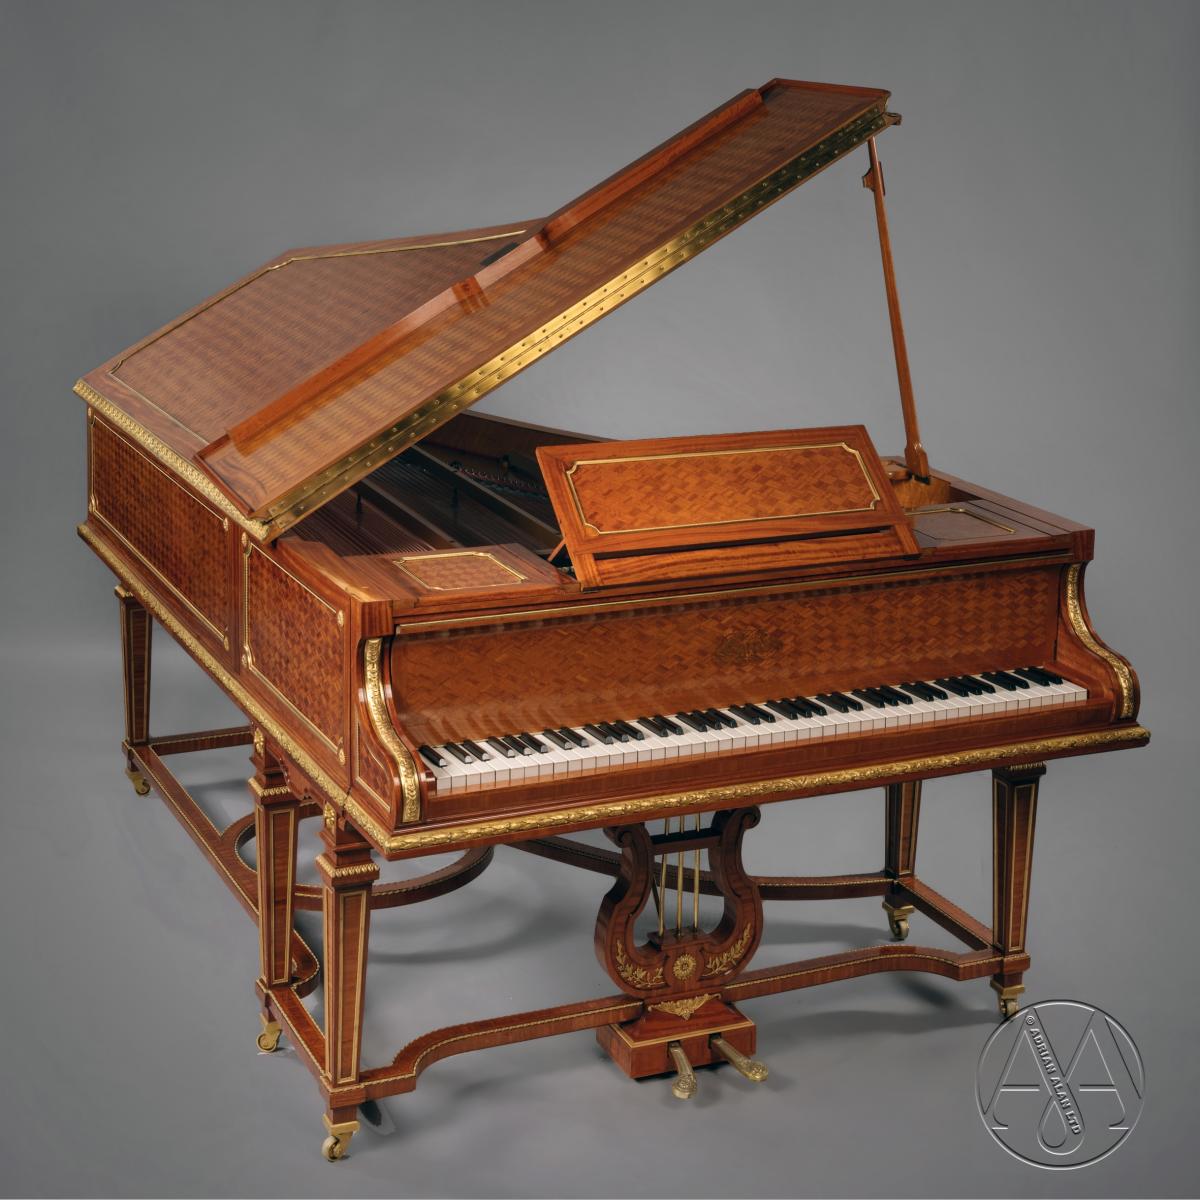 An Important Parquetry Inlaid Grand Piano by François Linke